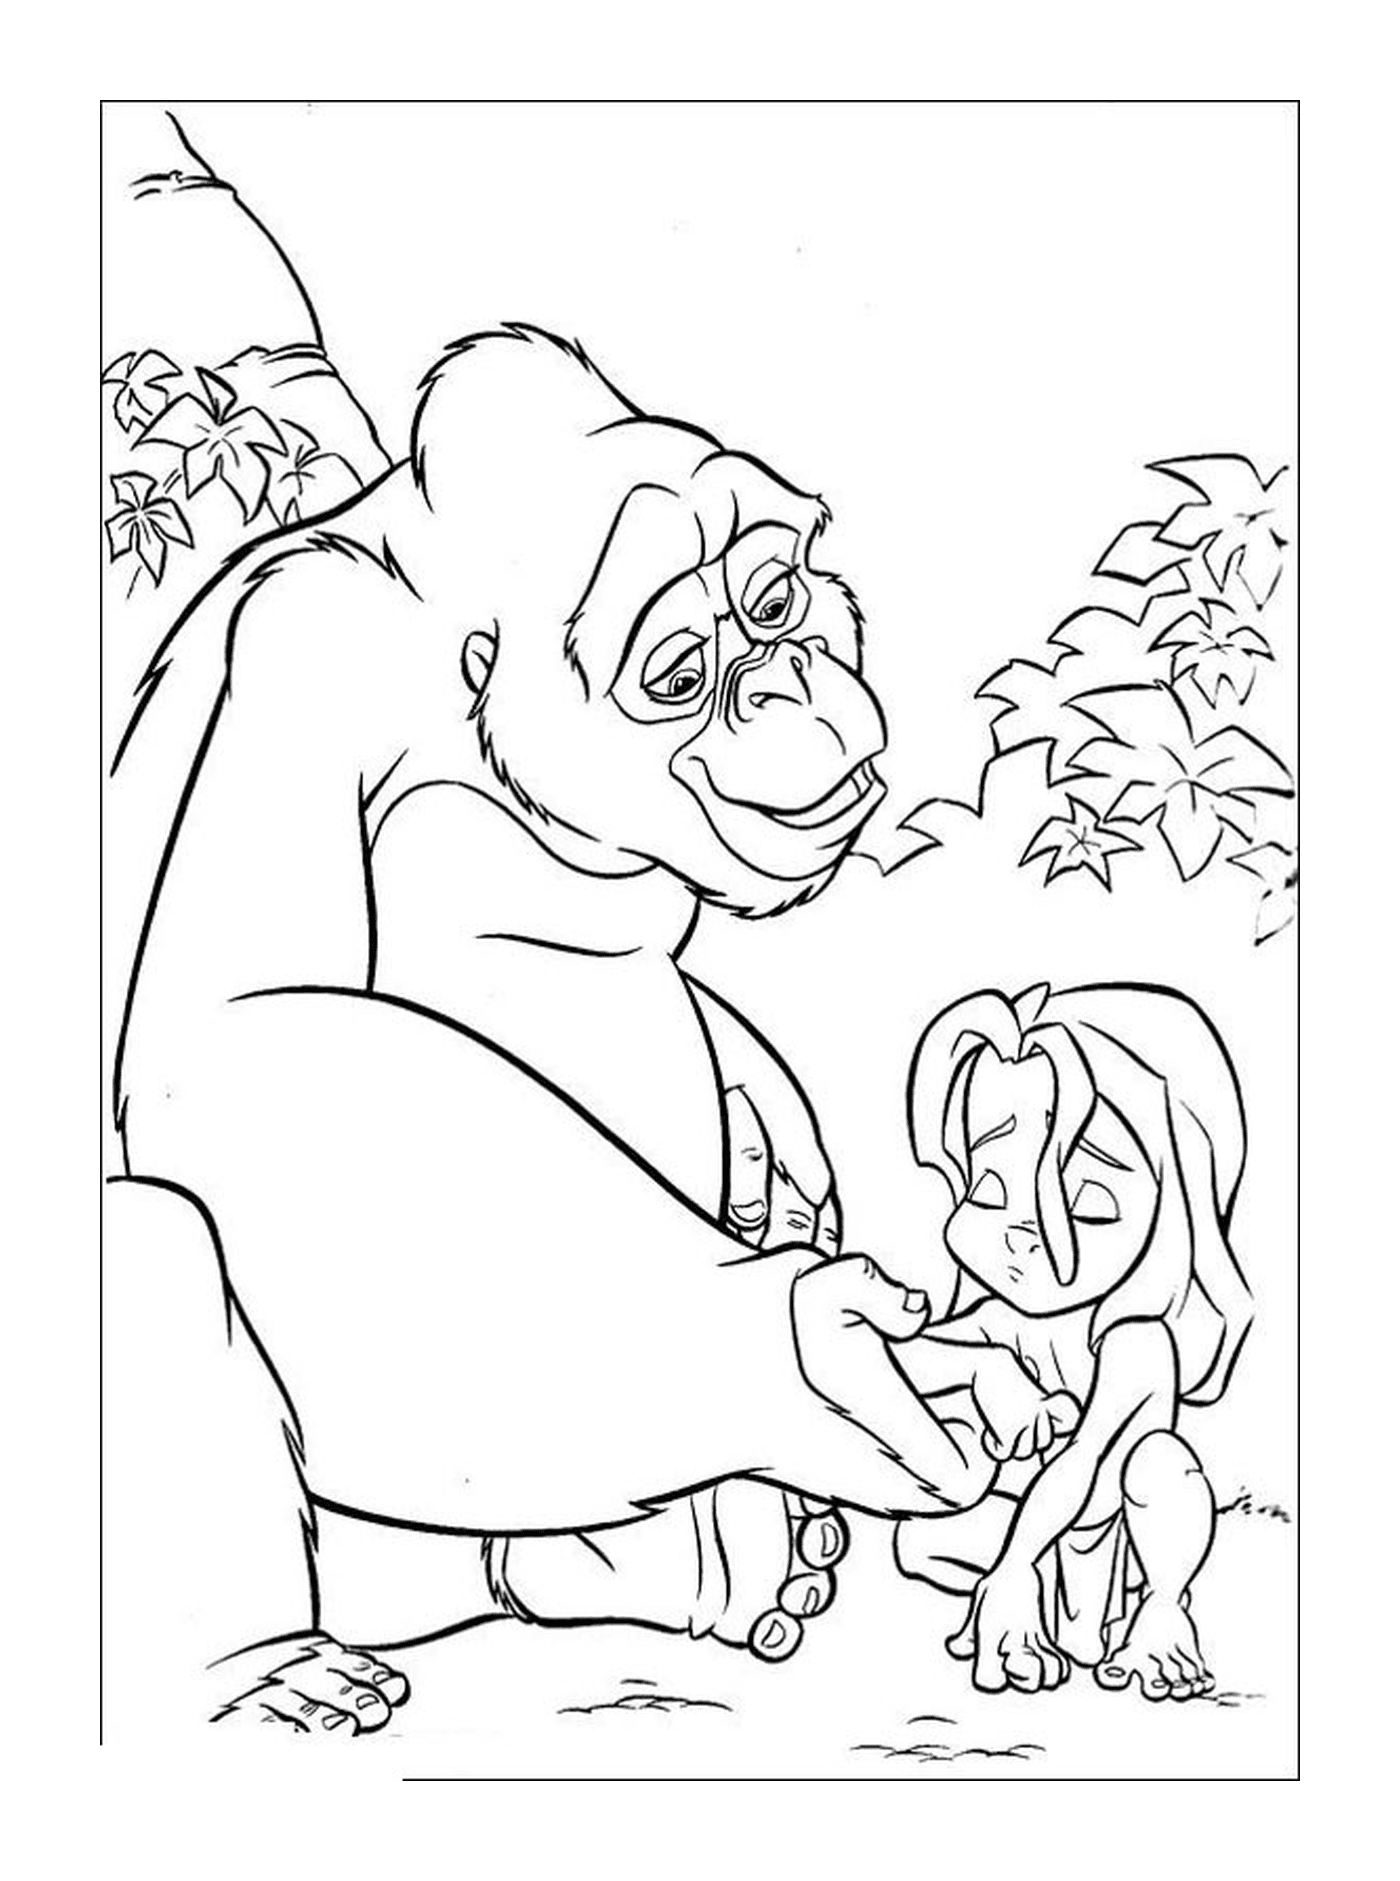  Gorilla holding a girl in her arms 